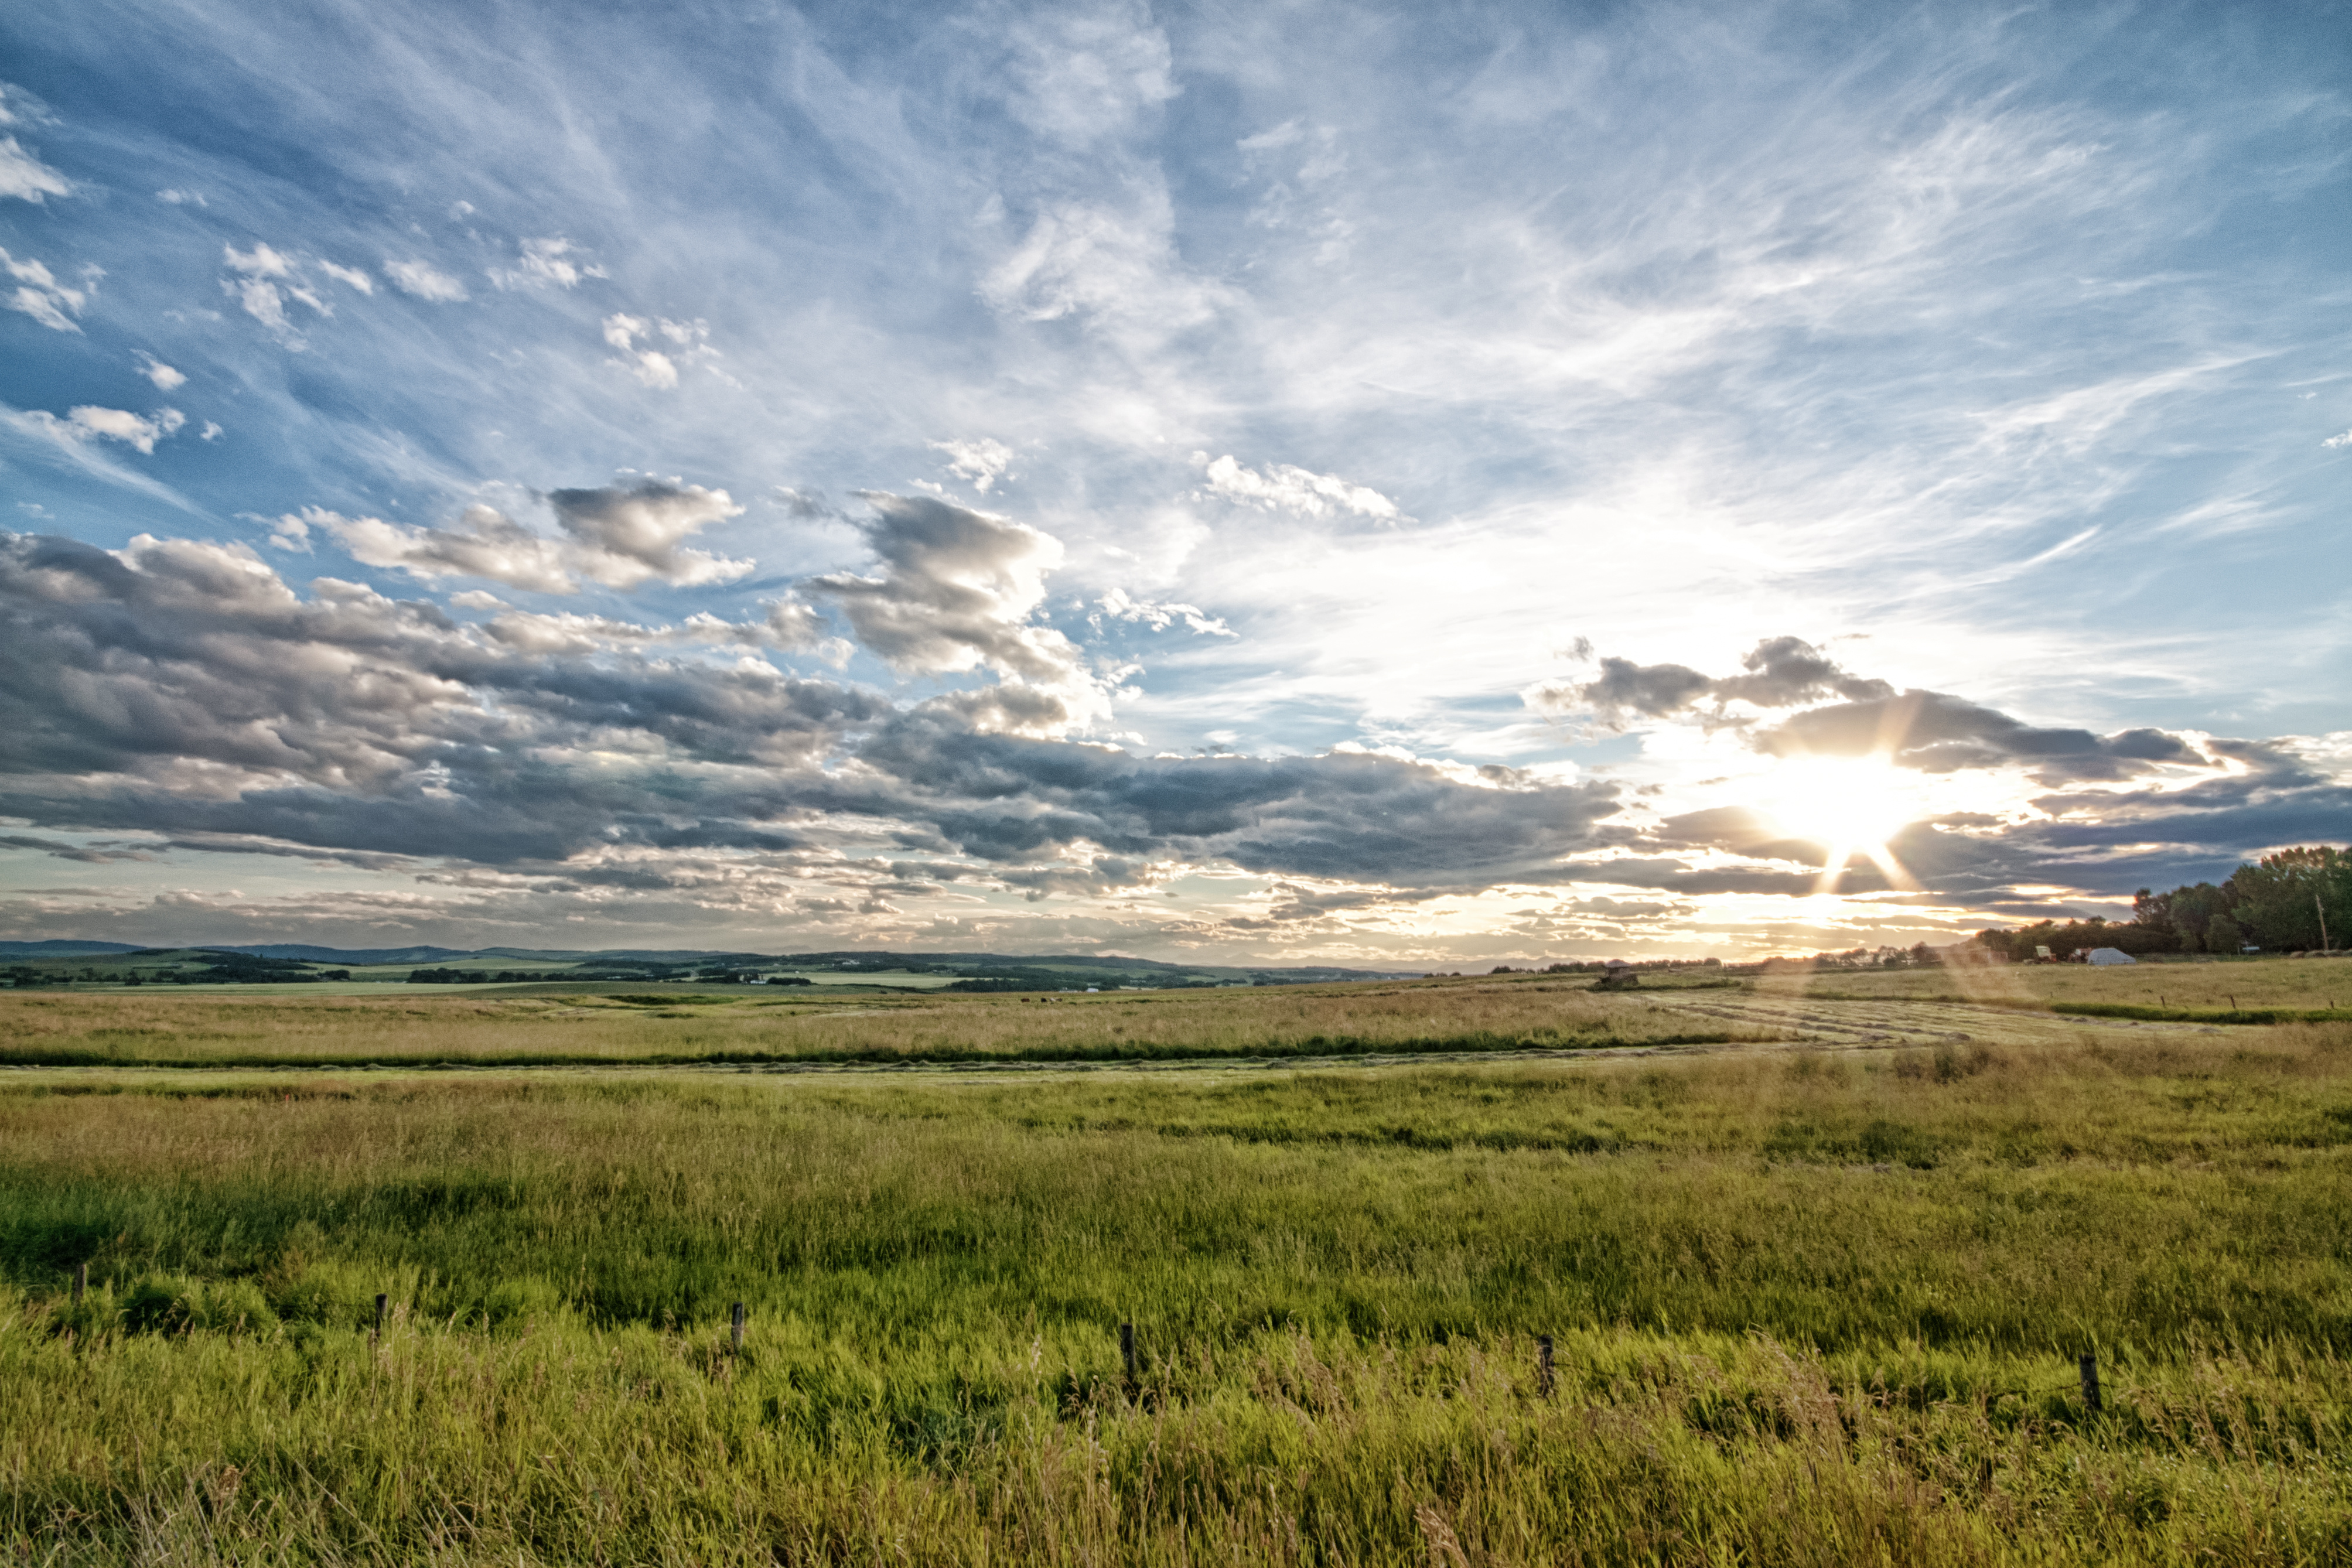 Sun setting on Alberta prairie grassland with some clouds in the sky.